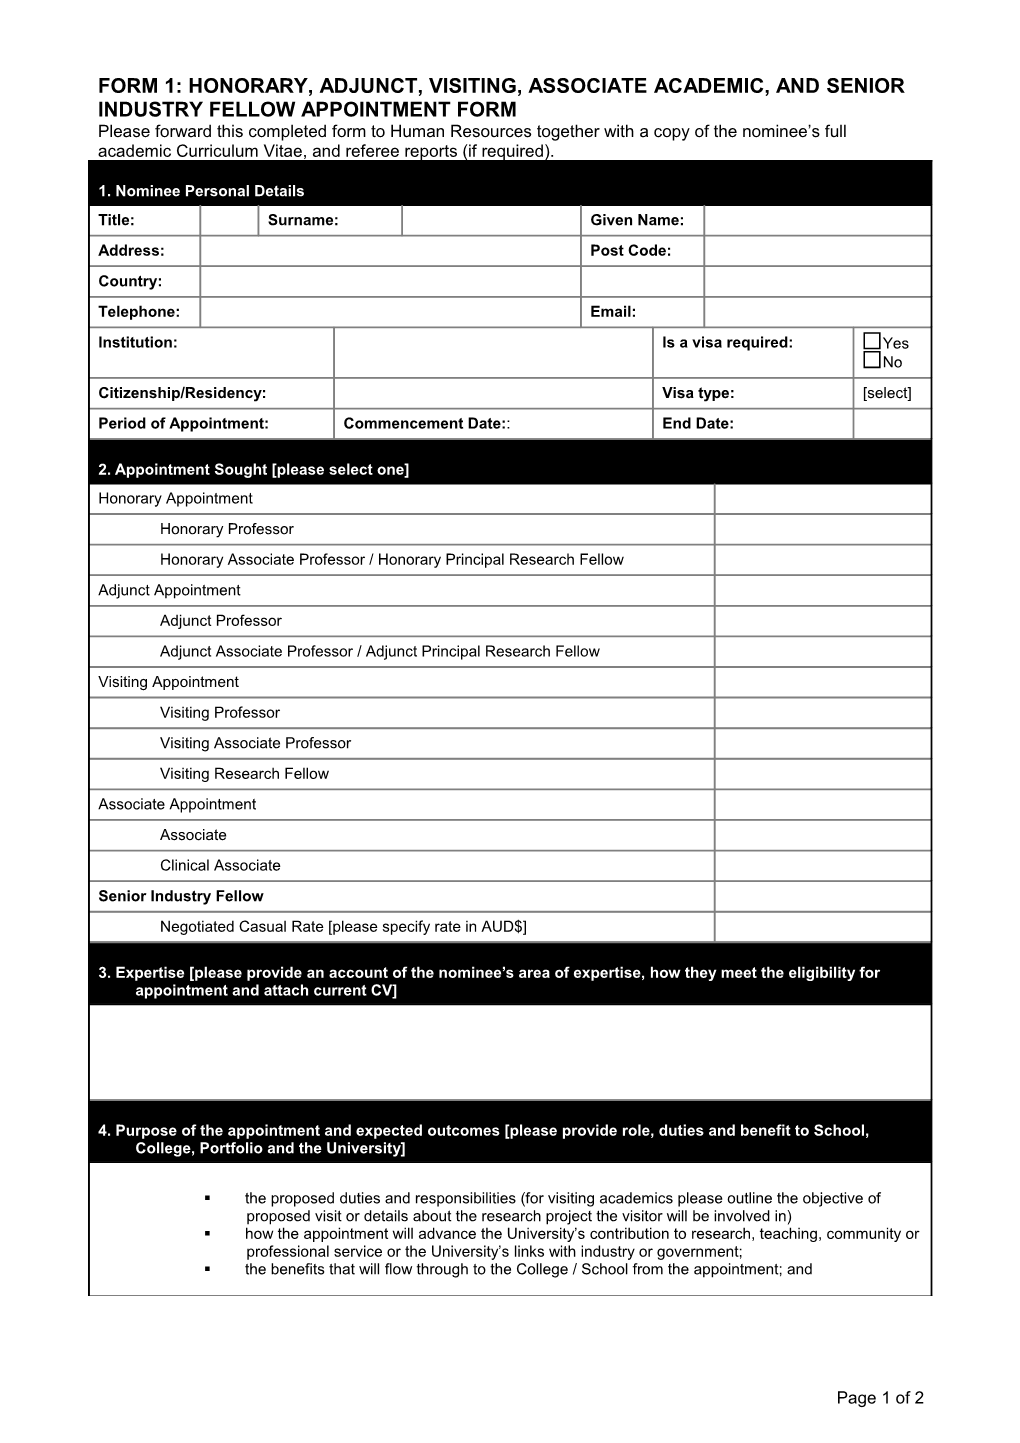 Form 1: HONORARY, ADJUNCT, and VISITING ACADEMIC APPOINTMENT FORM